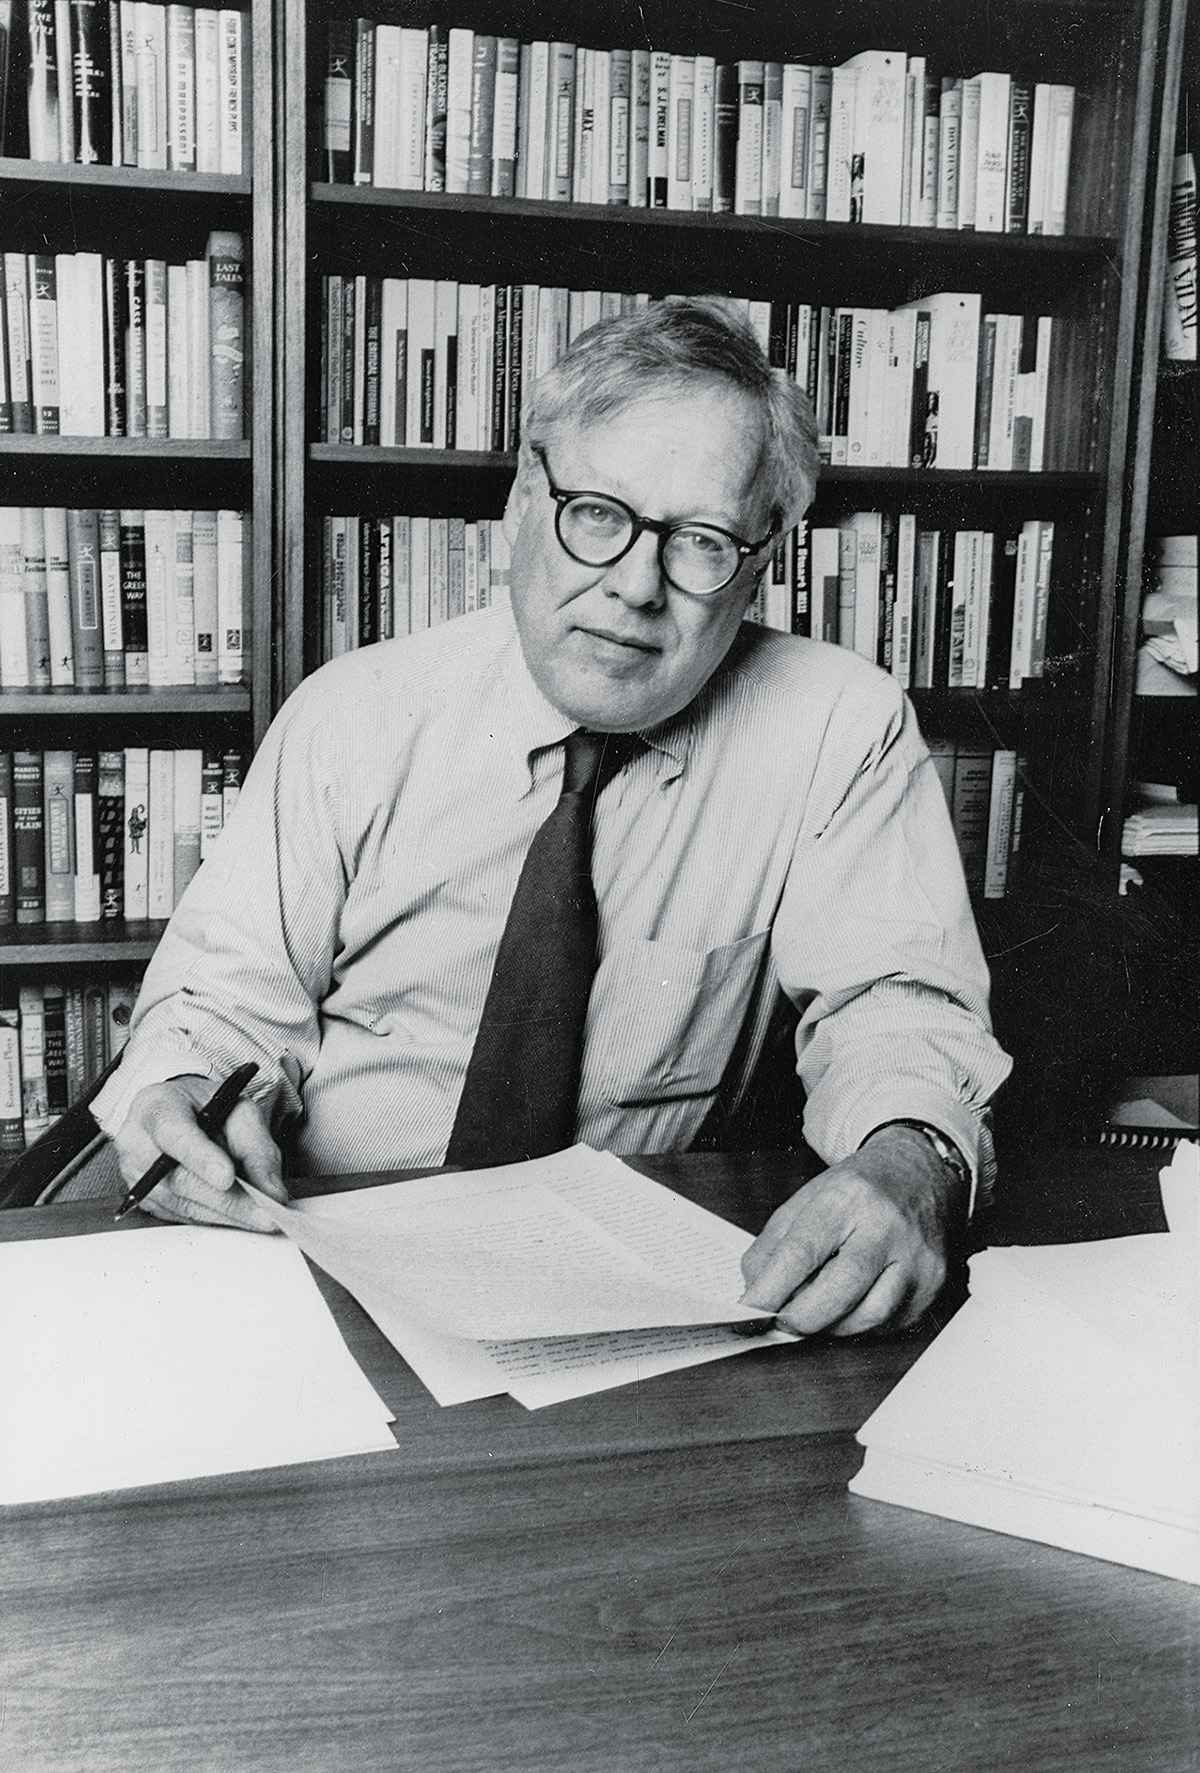 Epstein in the mid-1980s at Random House, where he edited W. H. Auden, E. L. Doctorow, and Jane Jacobs(Columbia University Archives)